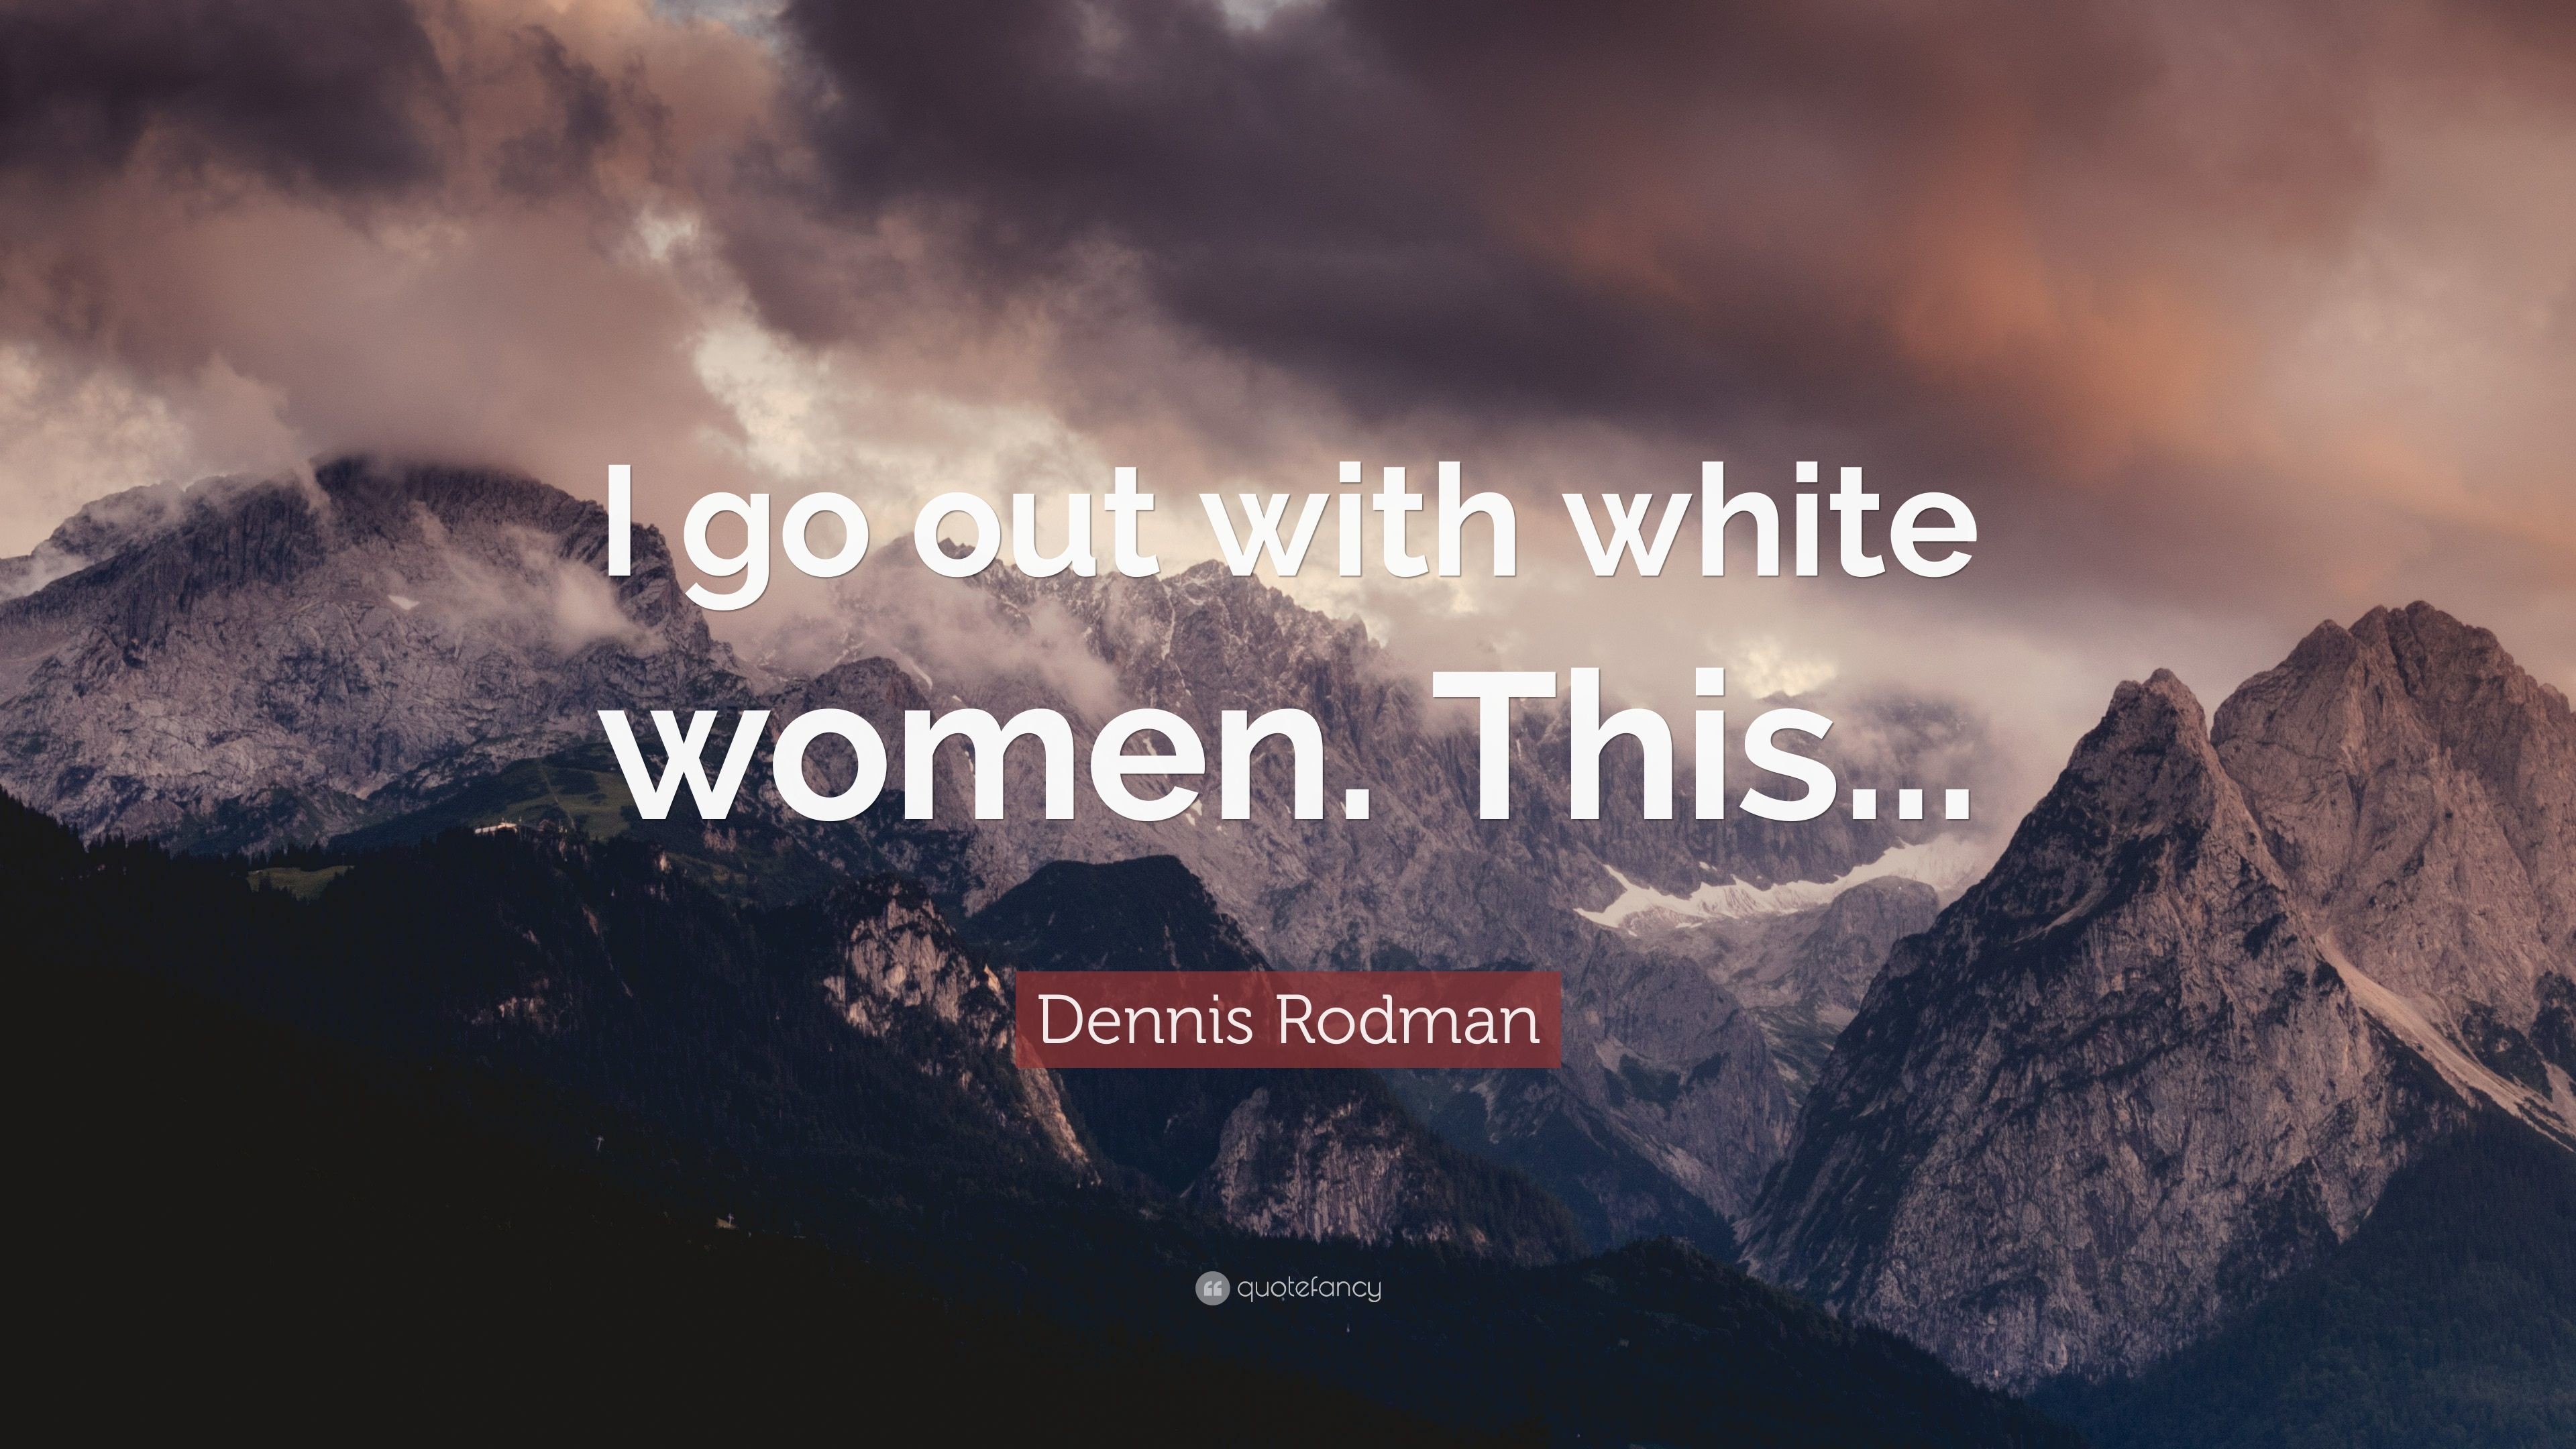 3840x2160 Dennis Rodman Quote: “I go out with white women. This.